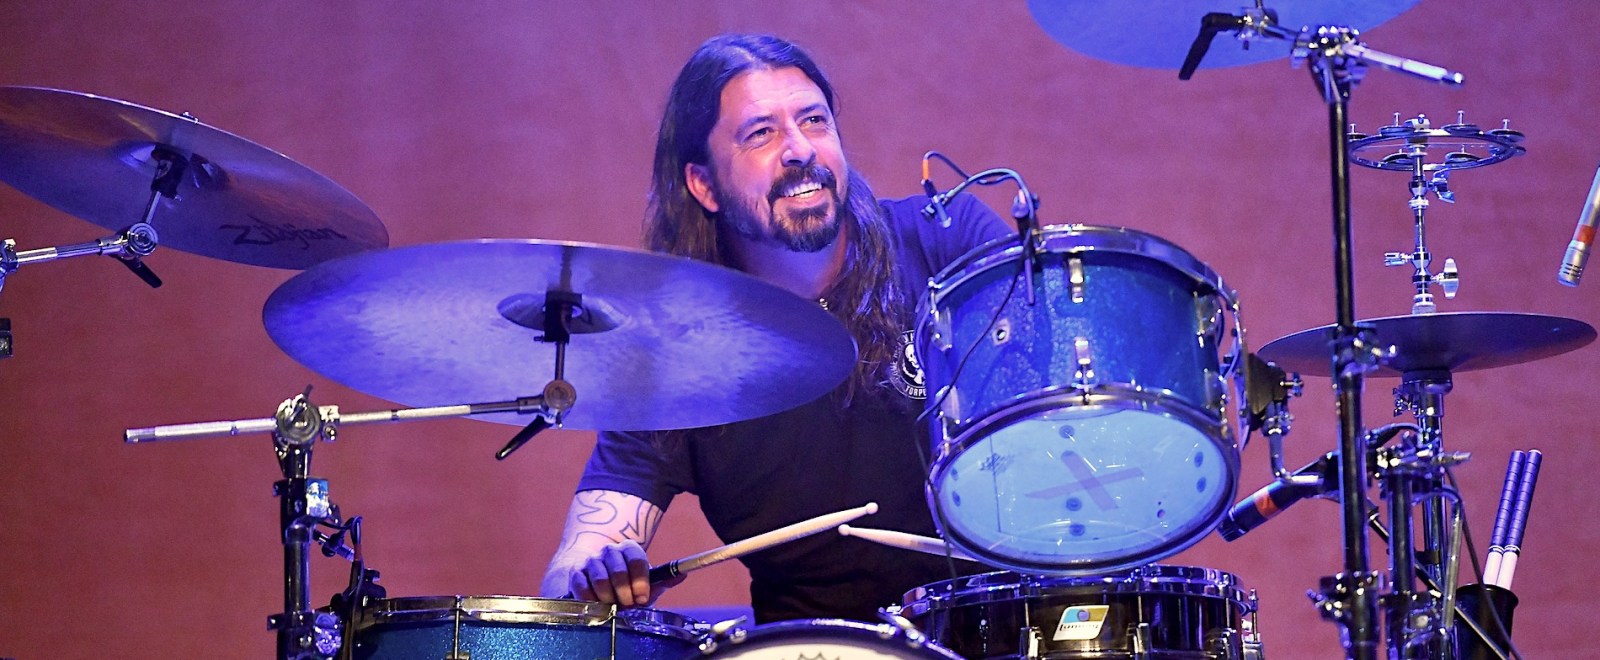 dave-grohl-drums-getty-full.jpg